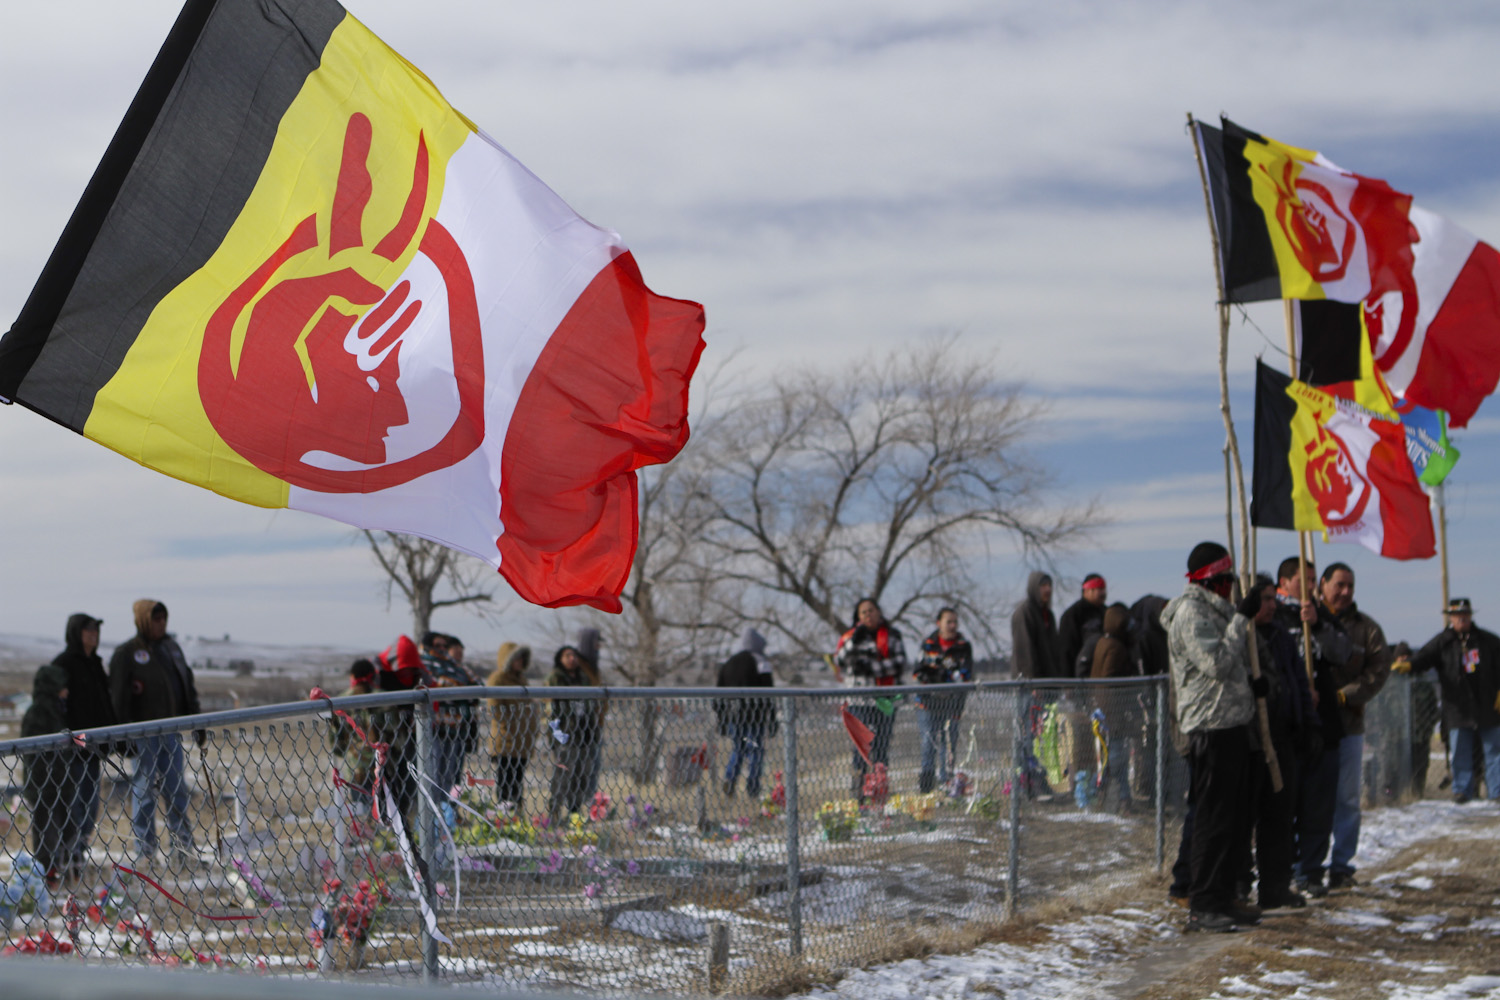 Liberation Day - Wounded Knee